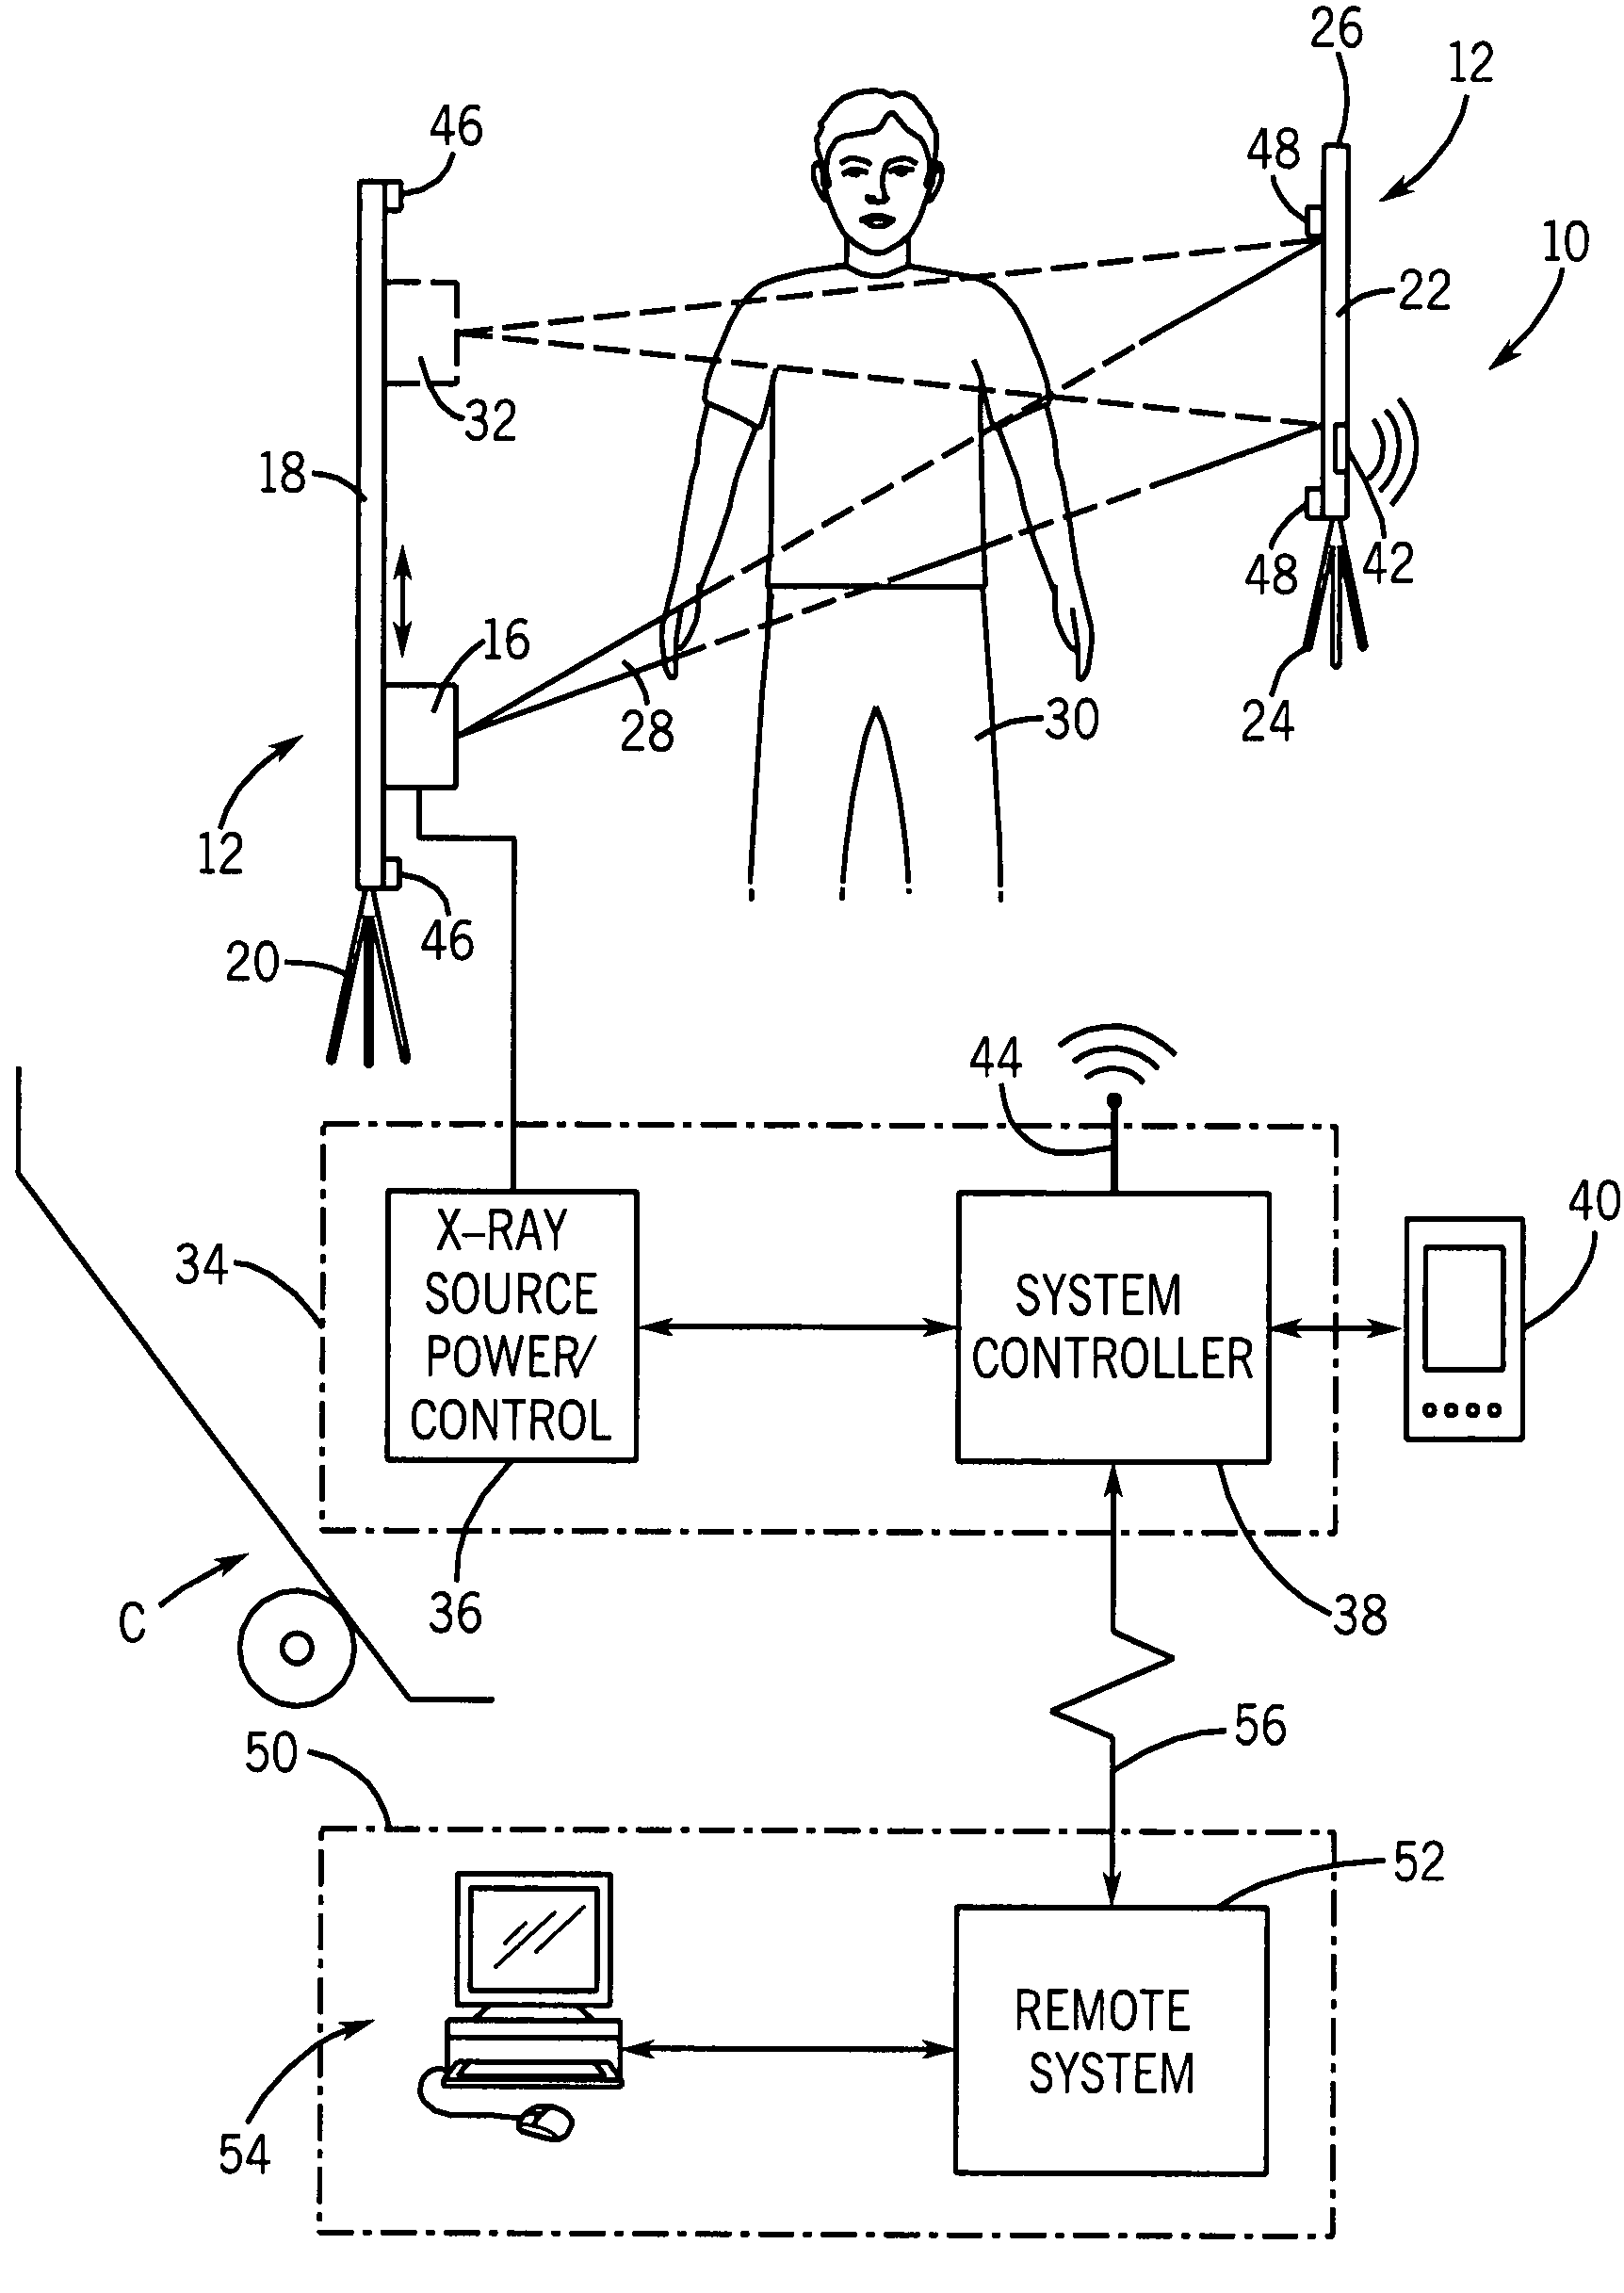 Portable digital tomosynthesis imaging system and method